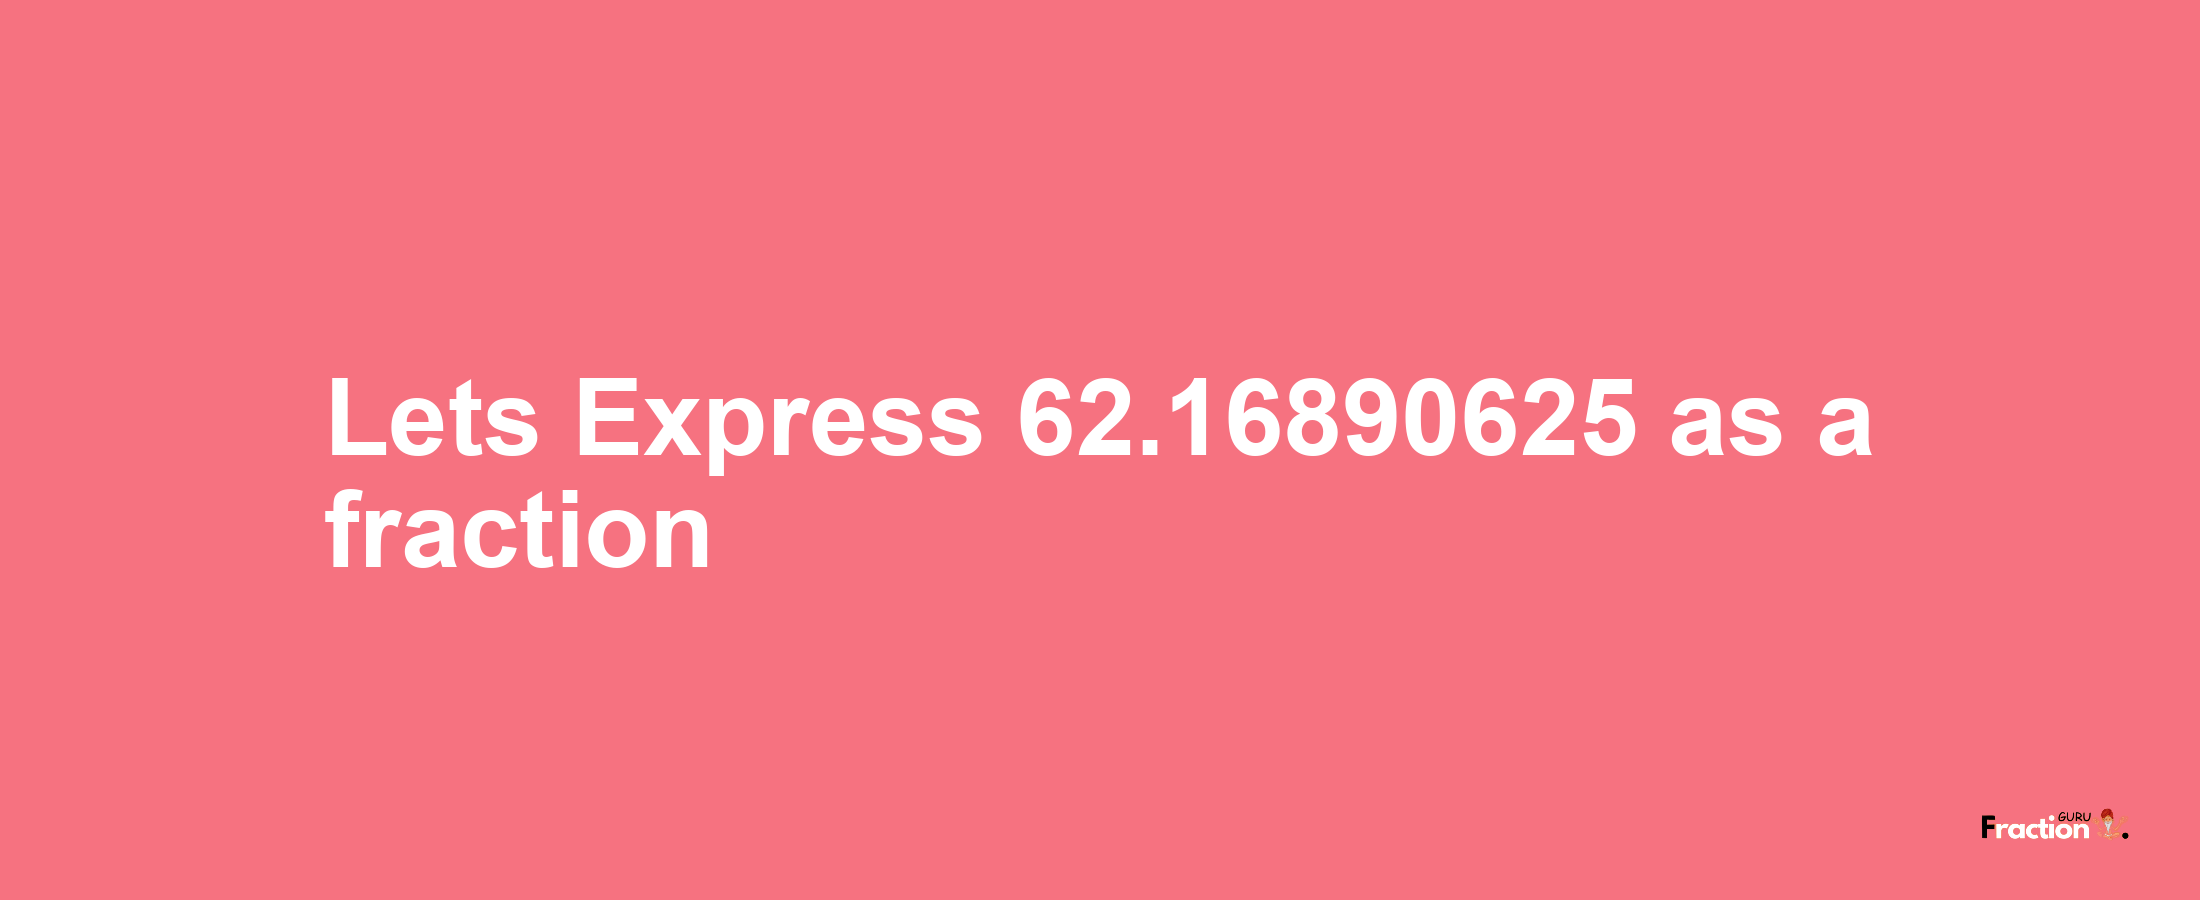 Lets Express 62.16890625 as afraction